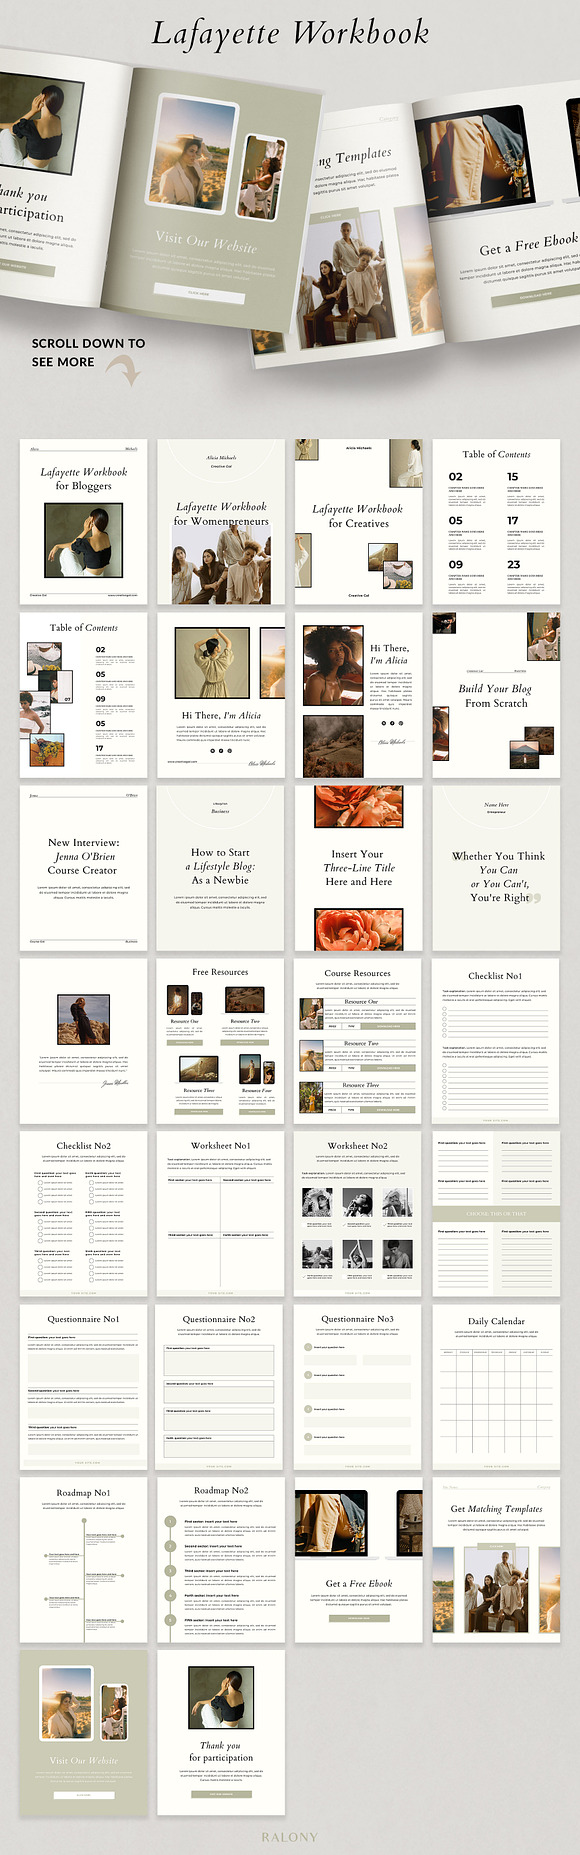 Course Creator Workbook | Lafayette in Magazine Templates - product preview 11